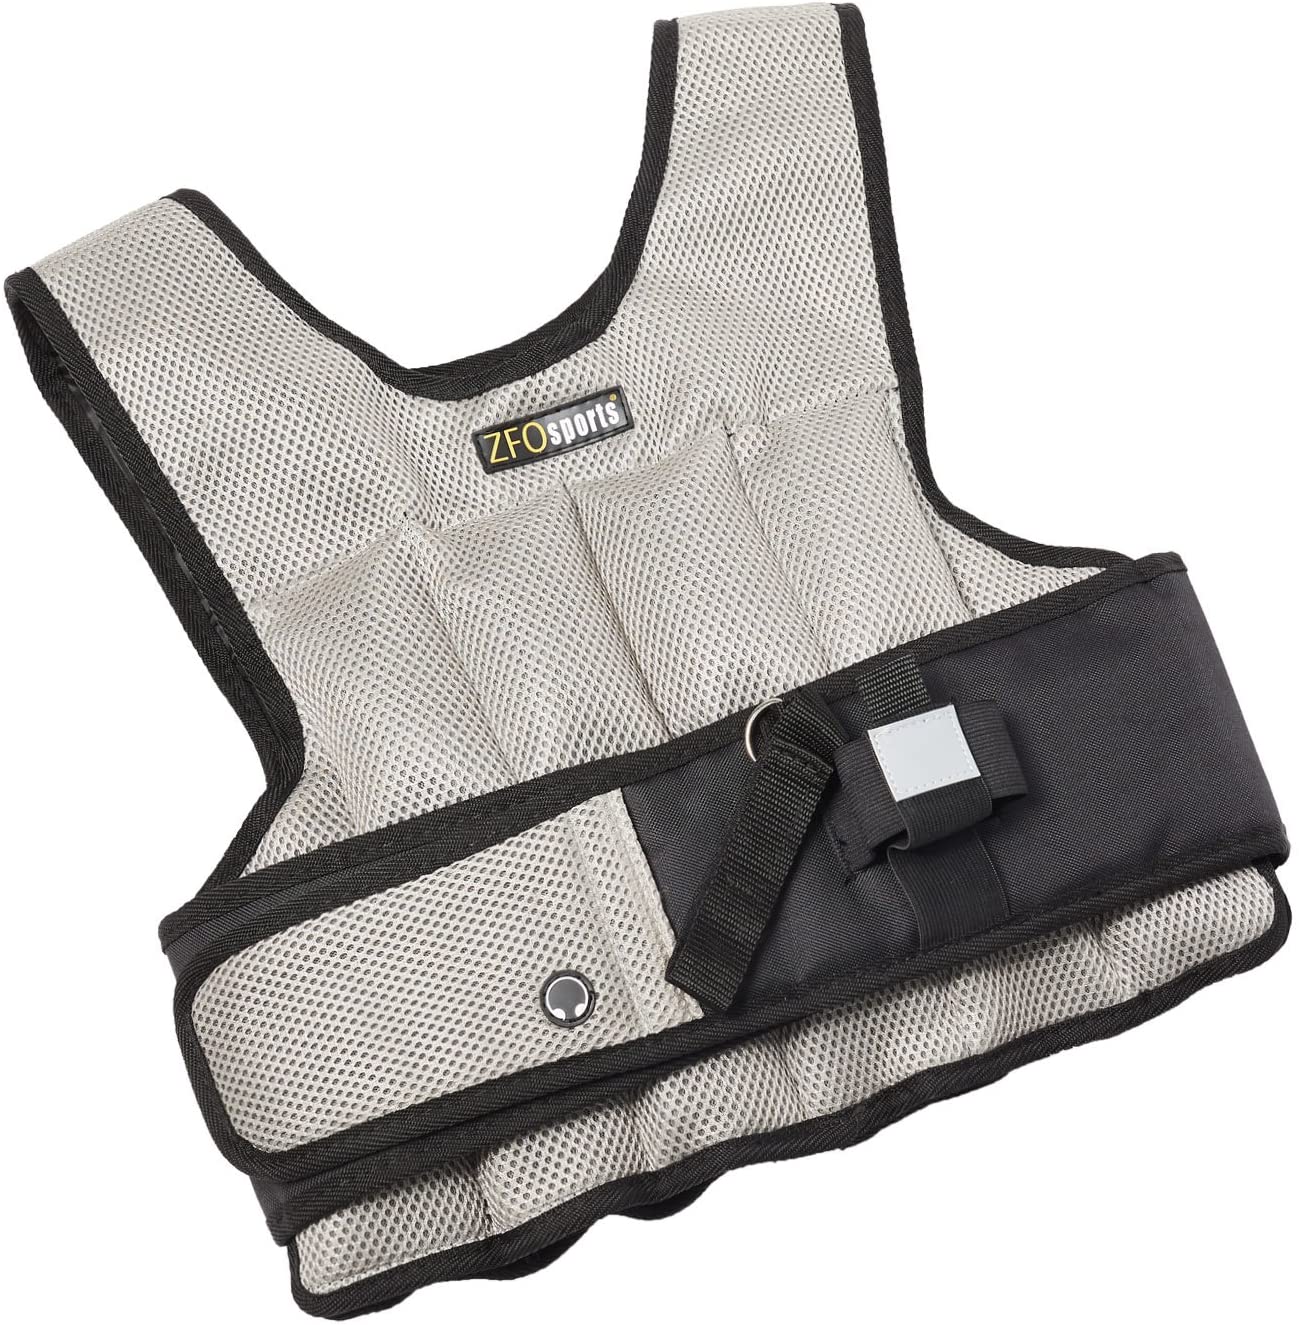 ZFO Sports Adjustable Weighted Vest